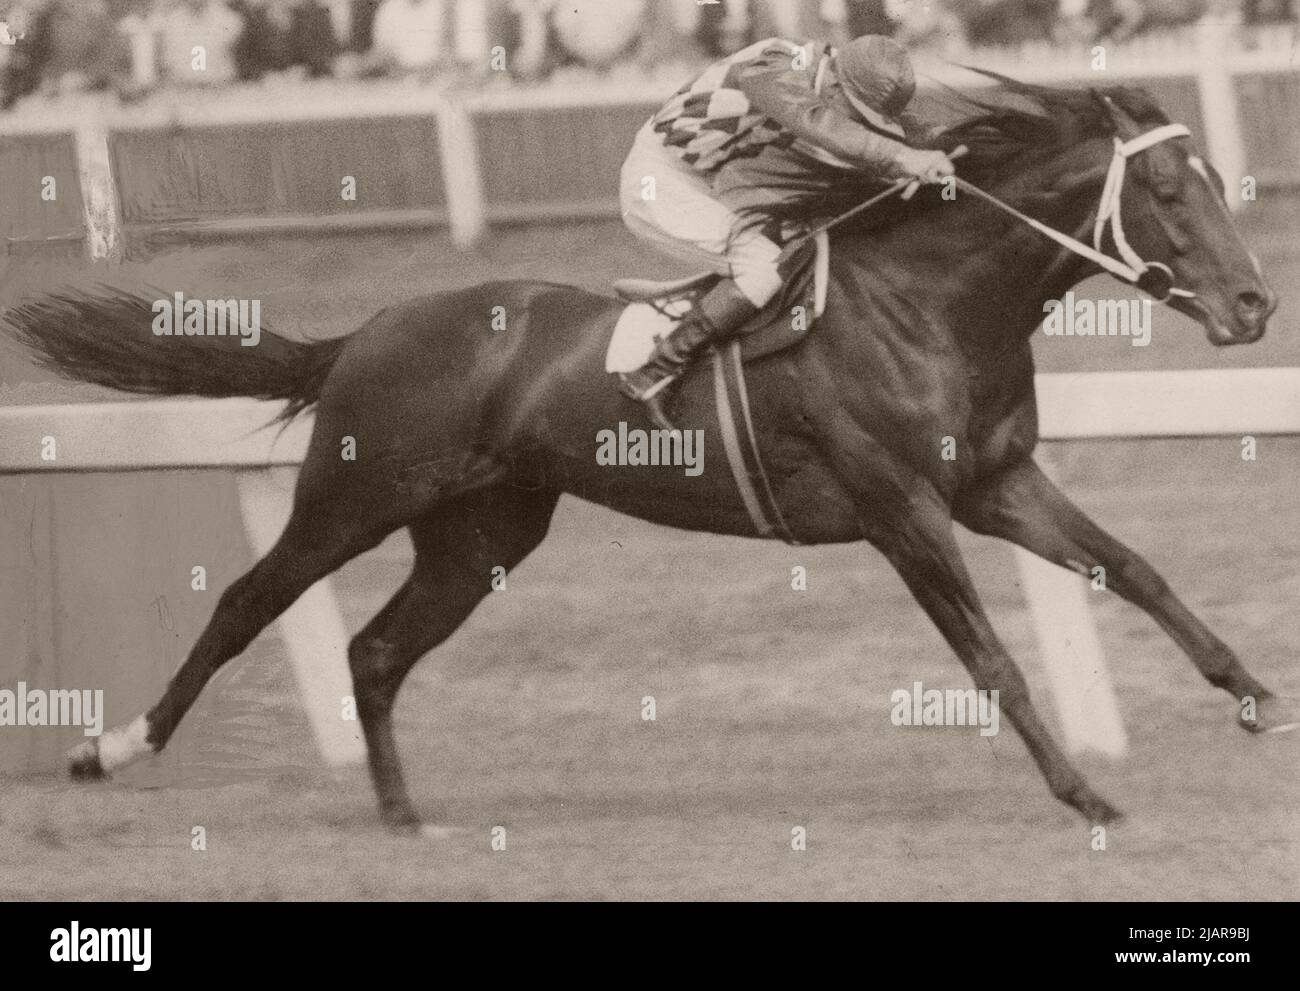 Comic Court (1945-1973) was a versatile Australian bred Thoroughbred racehorse who set race records at distances of 6 furlongs (1,200 metres) and 2 miles (3,200 metres). ca. 1949 Stock Photo